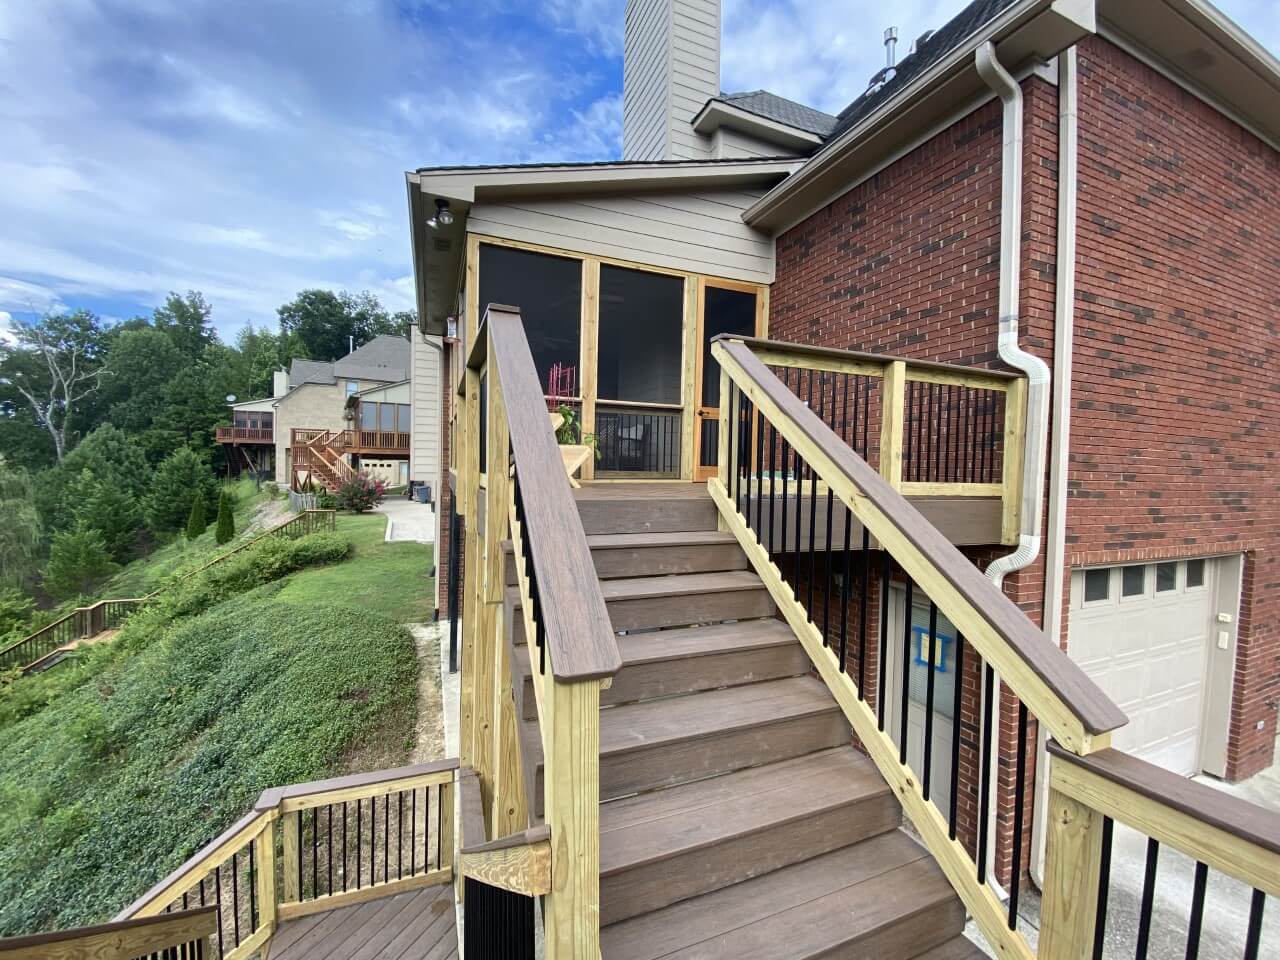 Close up image of deck stairs